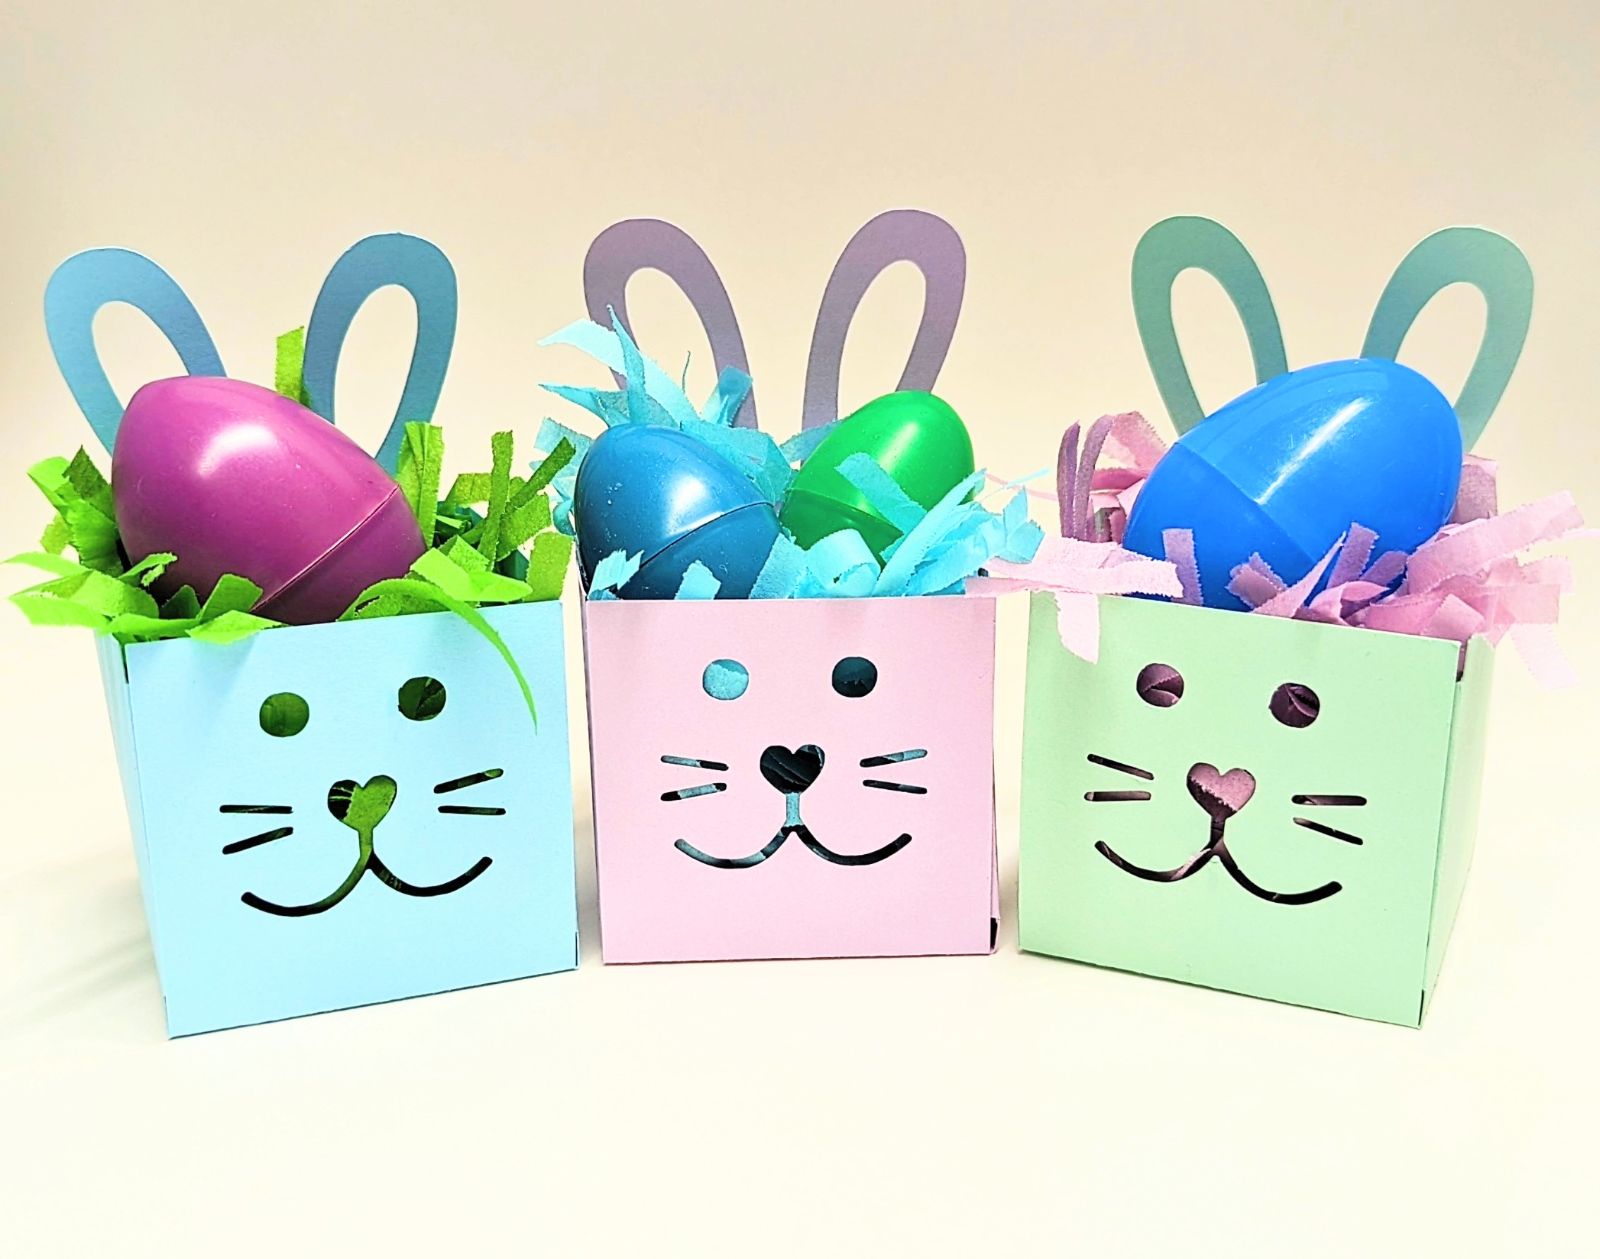 Bunny shaped boxes made out of pastel colored cardstock with a plastic egg inside.